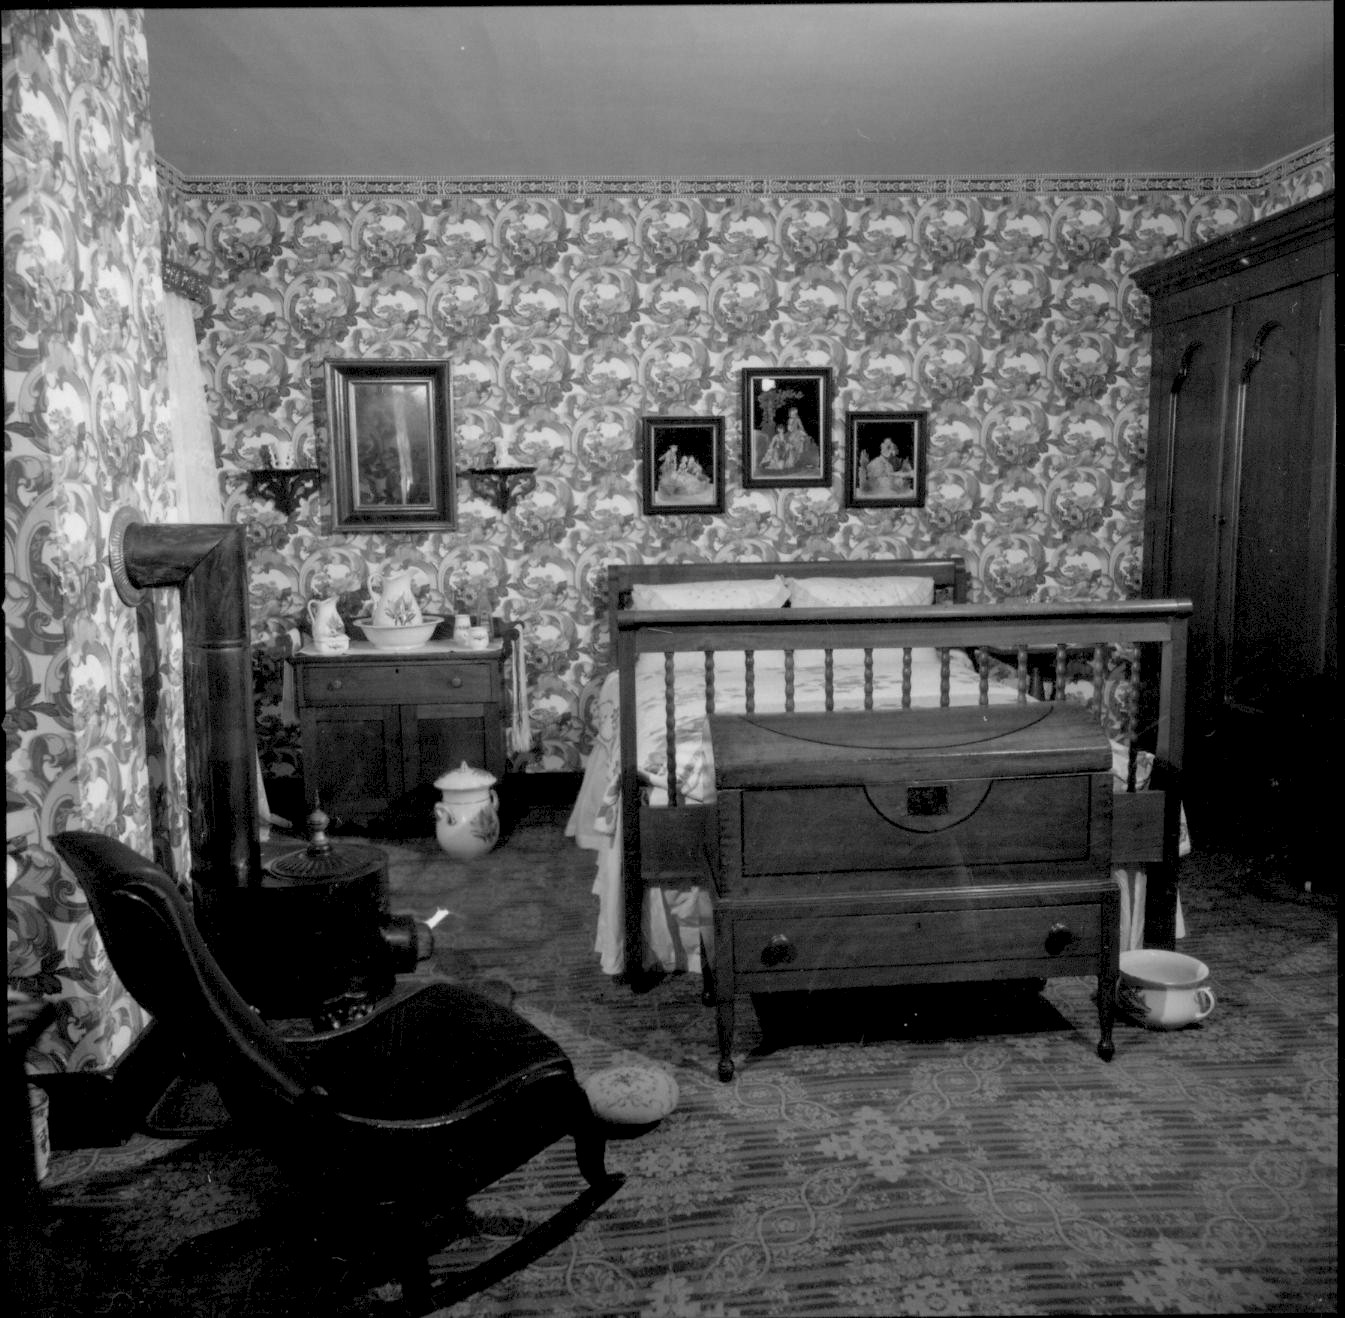 Mrs. Lincoln's Bedroom Lincoln Home, Mrs. Lincoln bedroom, table, books, papers, glasses, chair